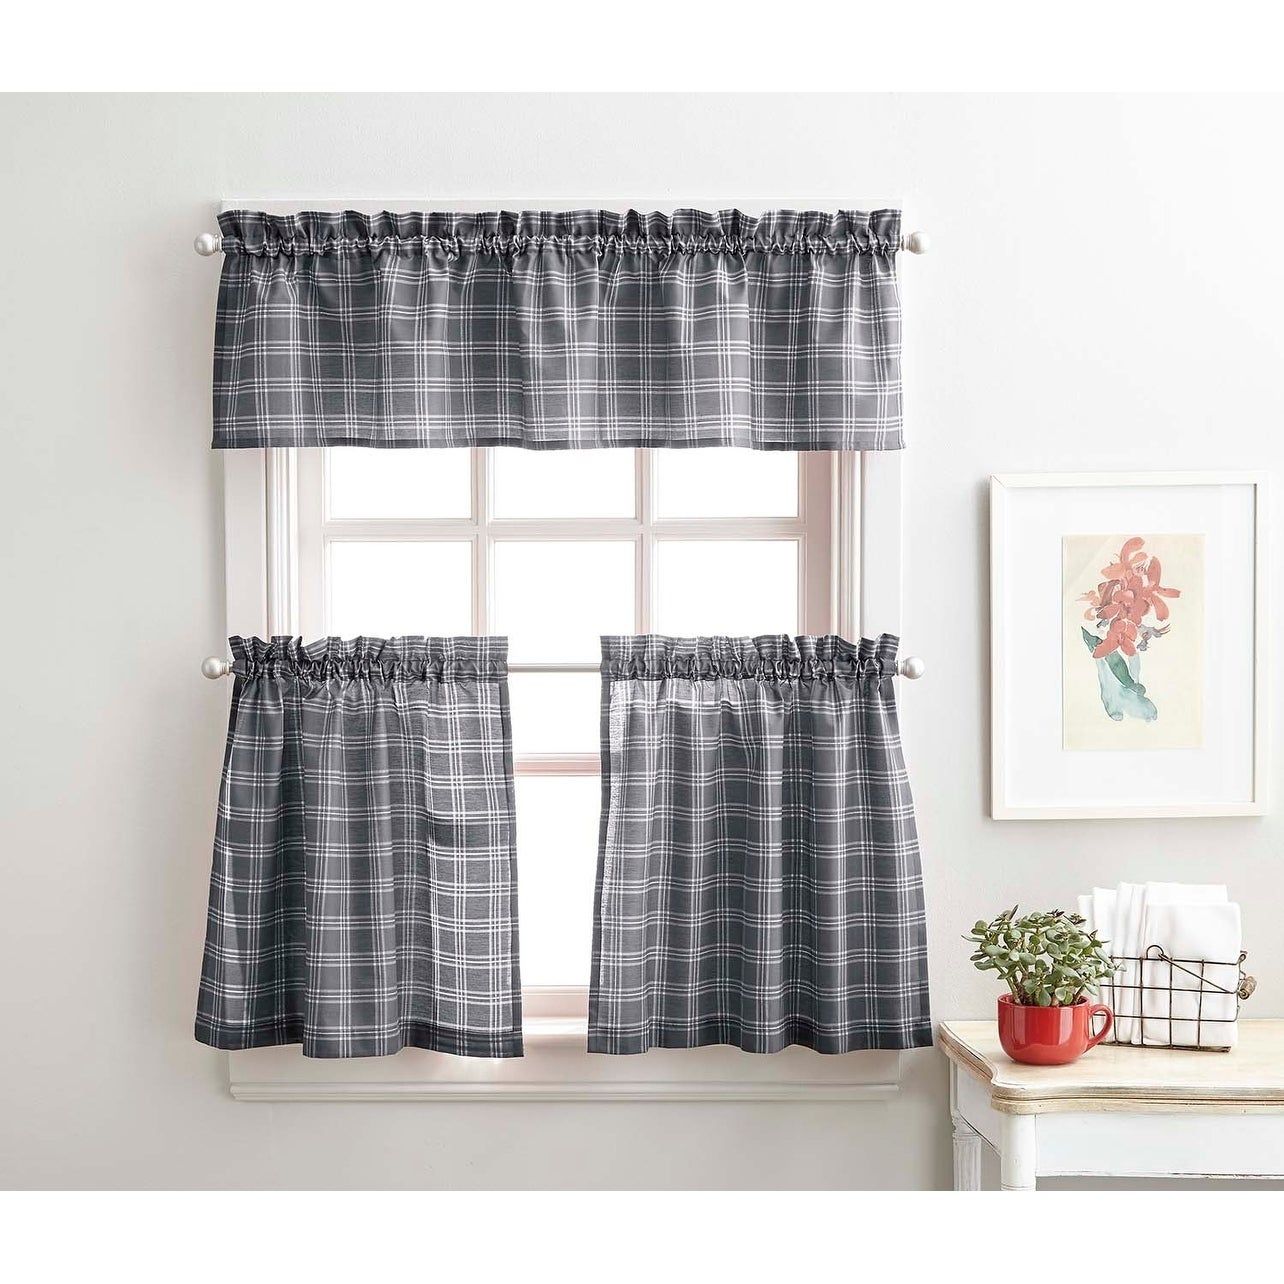 Details About Lodge Plaid 3 Piece Kitchen Curtain Tier And Valance Set – Throughout Red Delicious Apple 3 Piece Curtain Tiers (View 7 of 20)